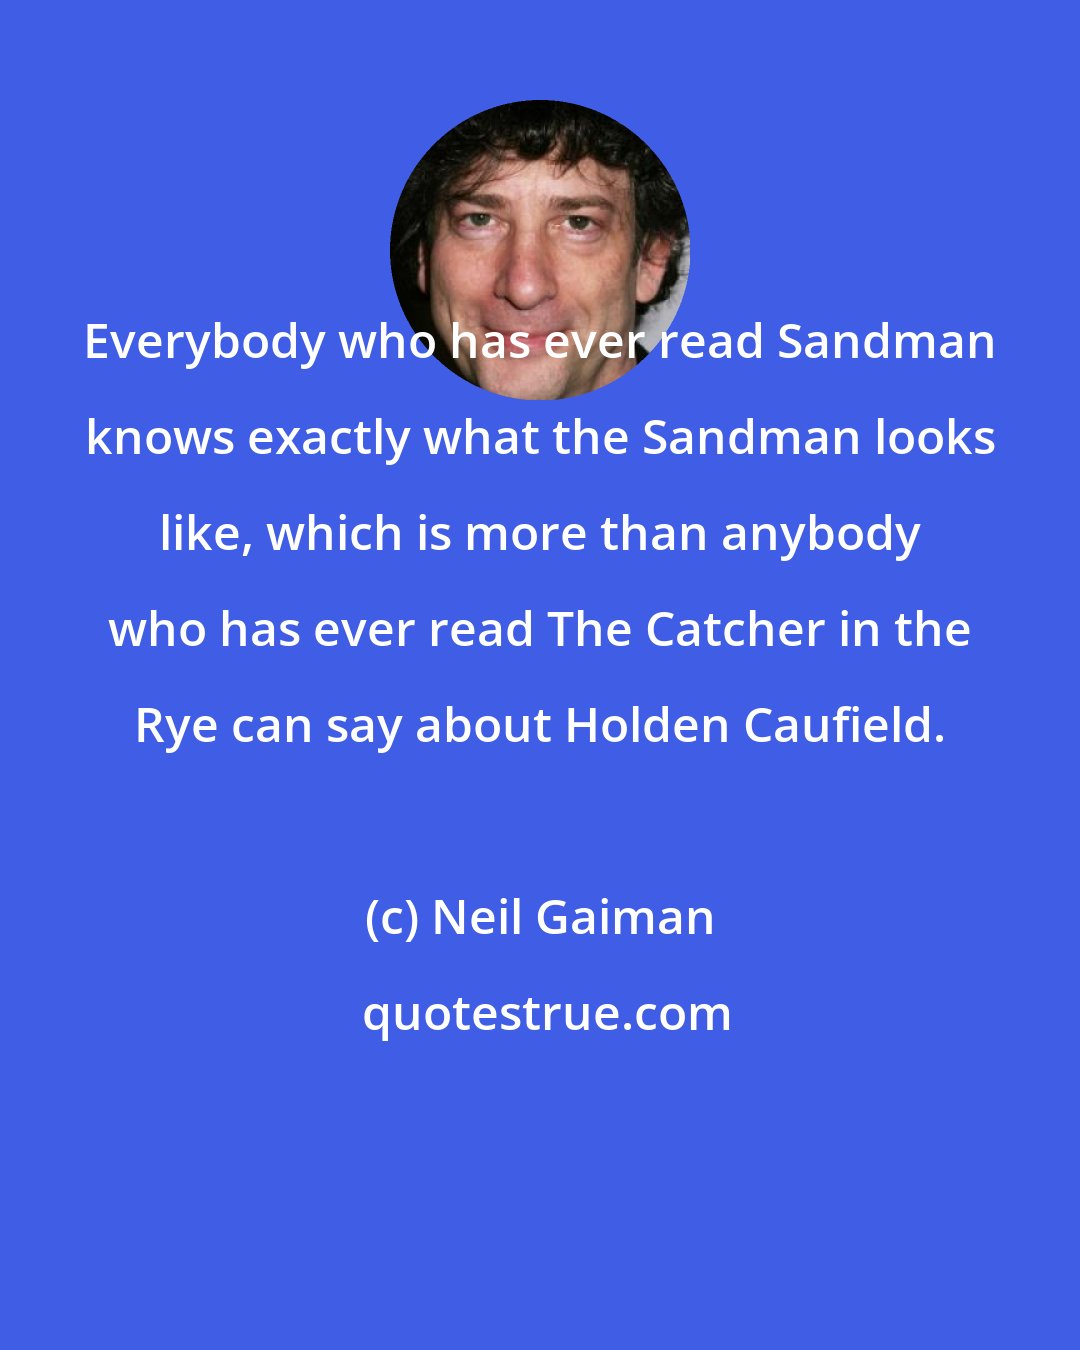 Neil Gaiman: Everybody who has ever read Sandman knows exactly what the Sandman looks like, which is more than anybody who has ever read The Catcher in the Rye can say about Holden Caufield.